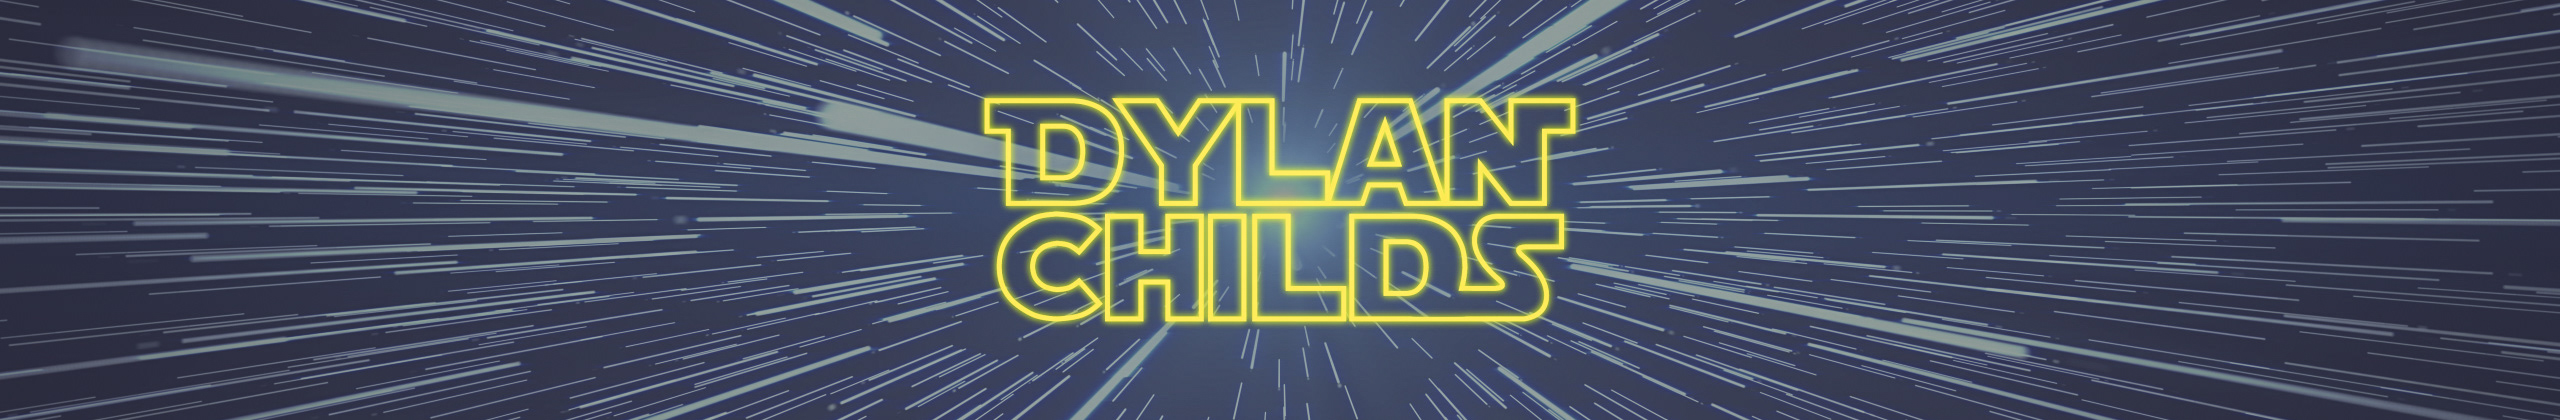 Dylan Childs's profile banner